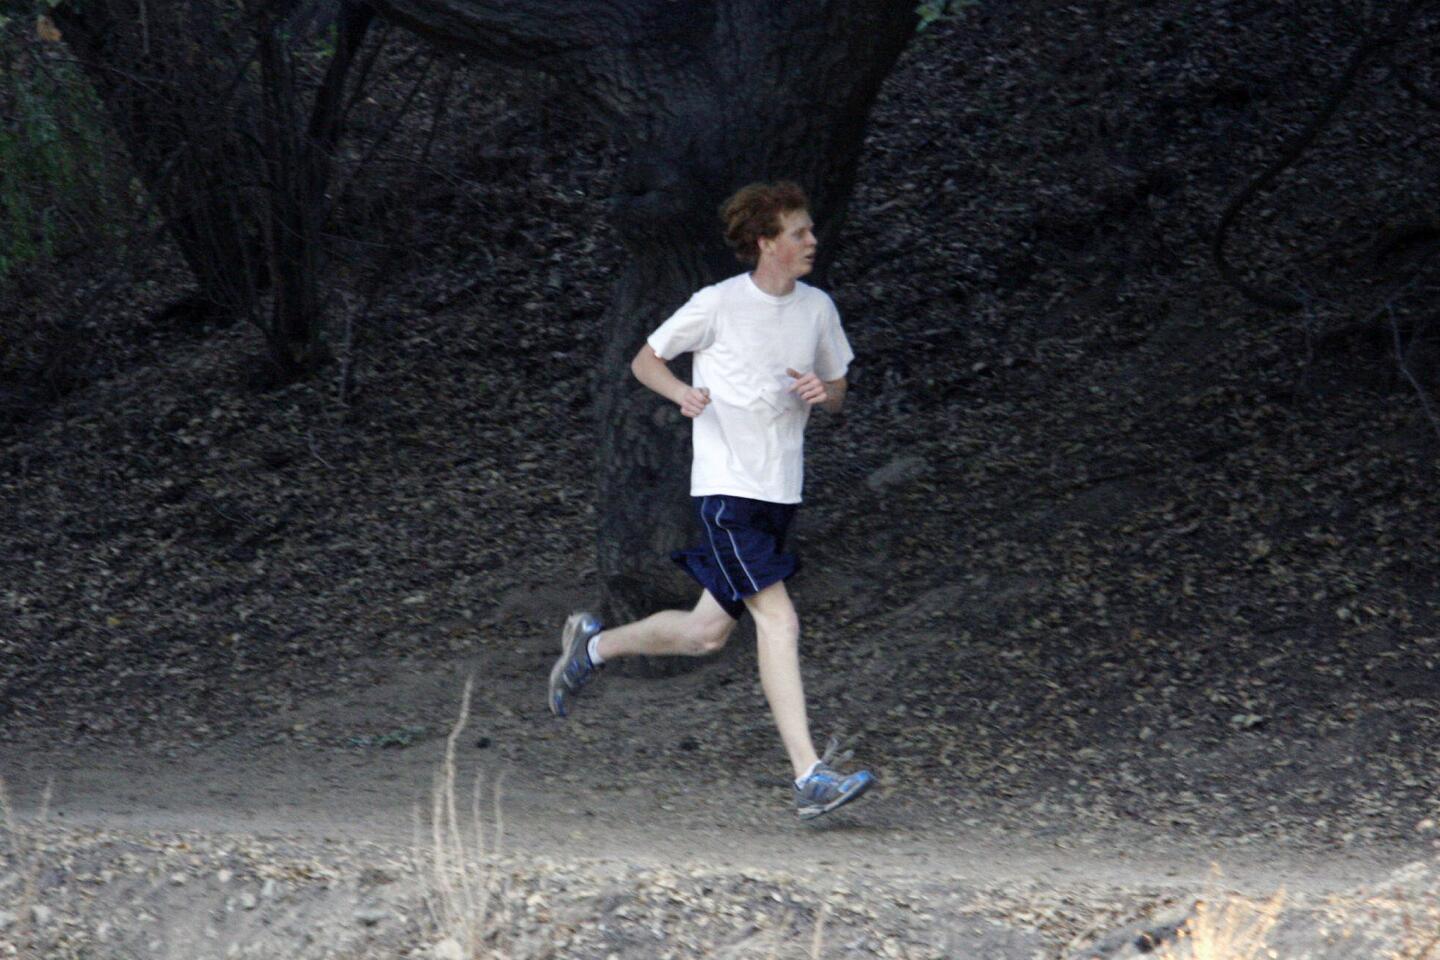 Cross country race series at Crescenta Valley Park